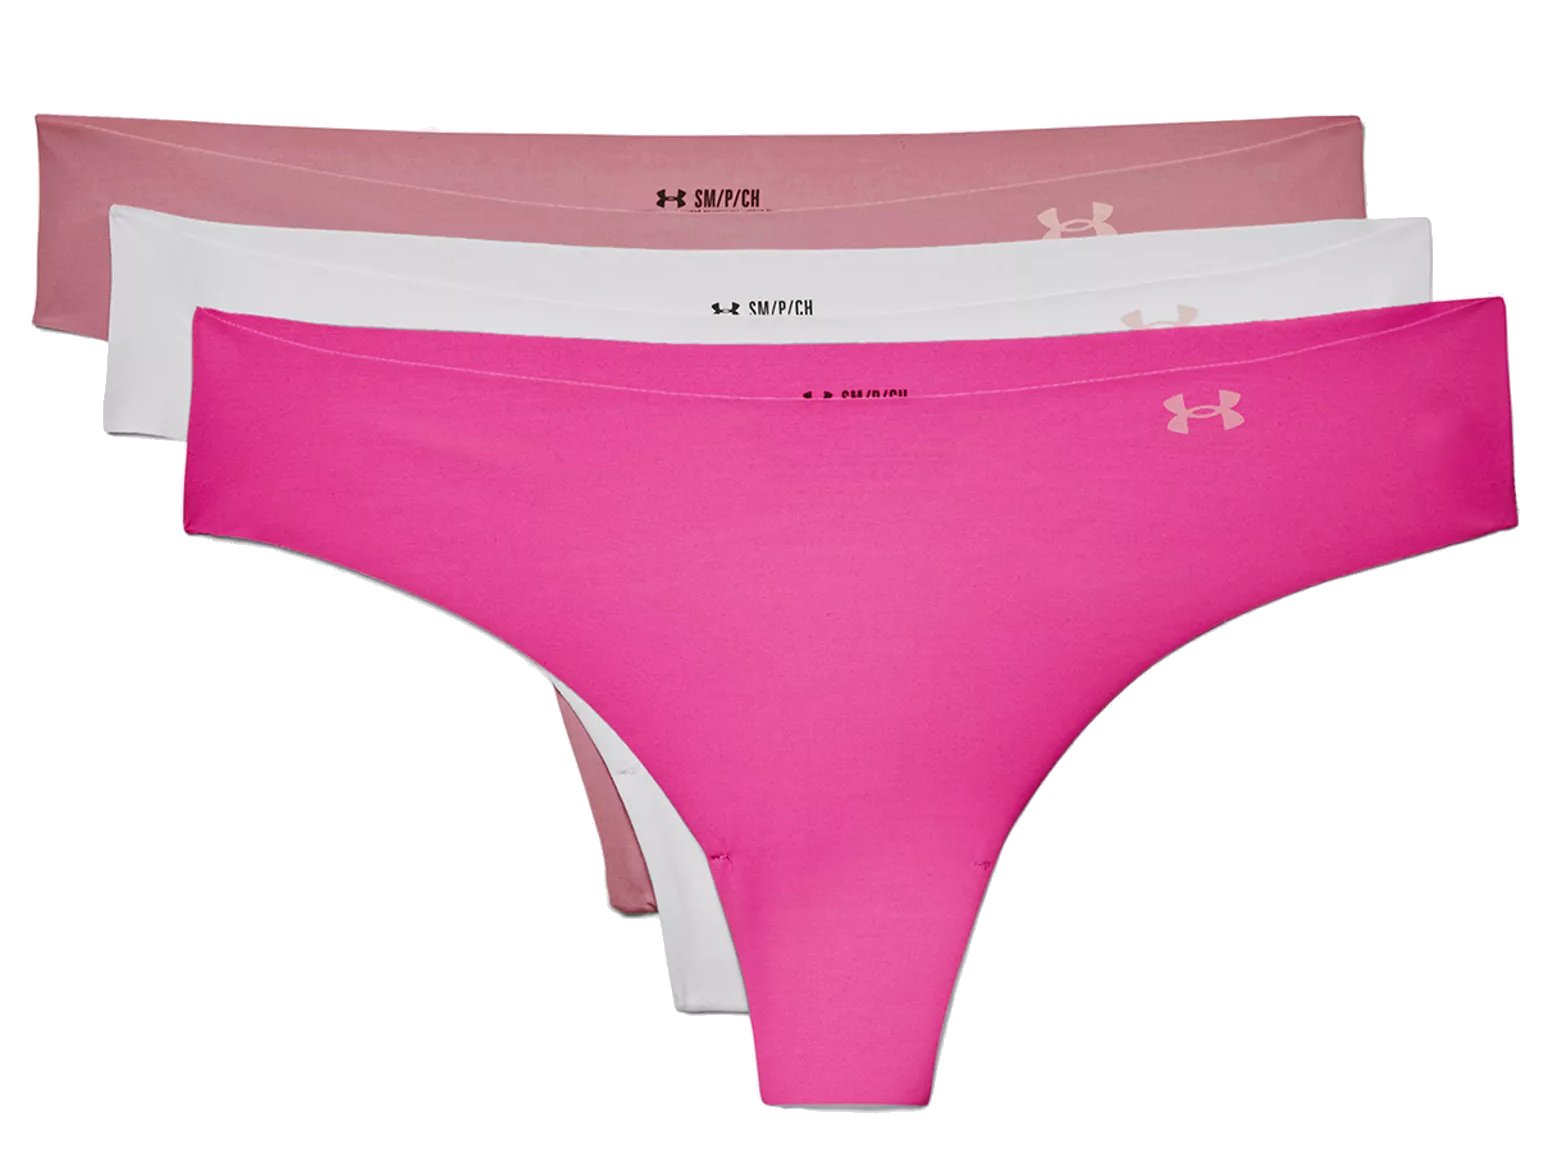 Under Armour Women's UA Pure Stretch Thong 3-Pack 1325615 - Pink, M